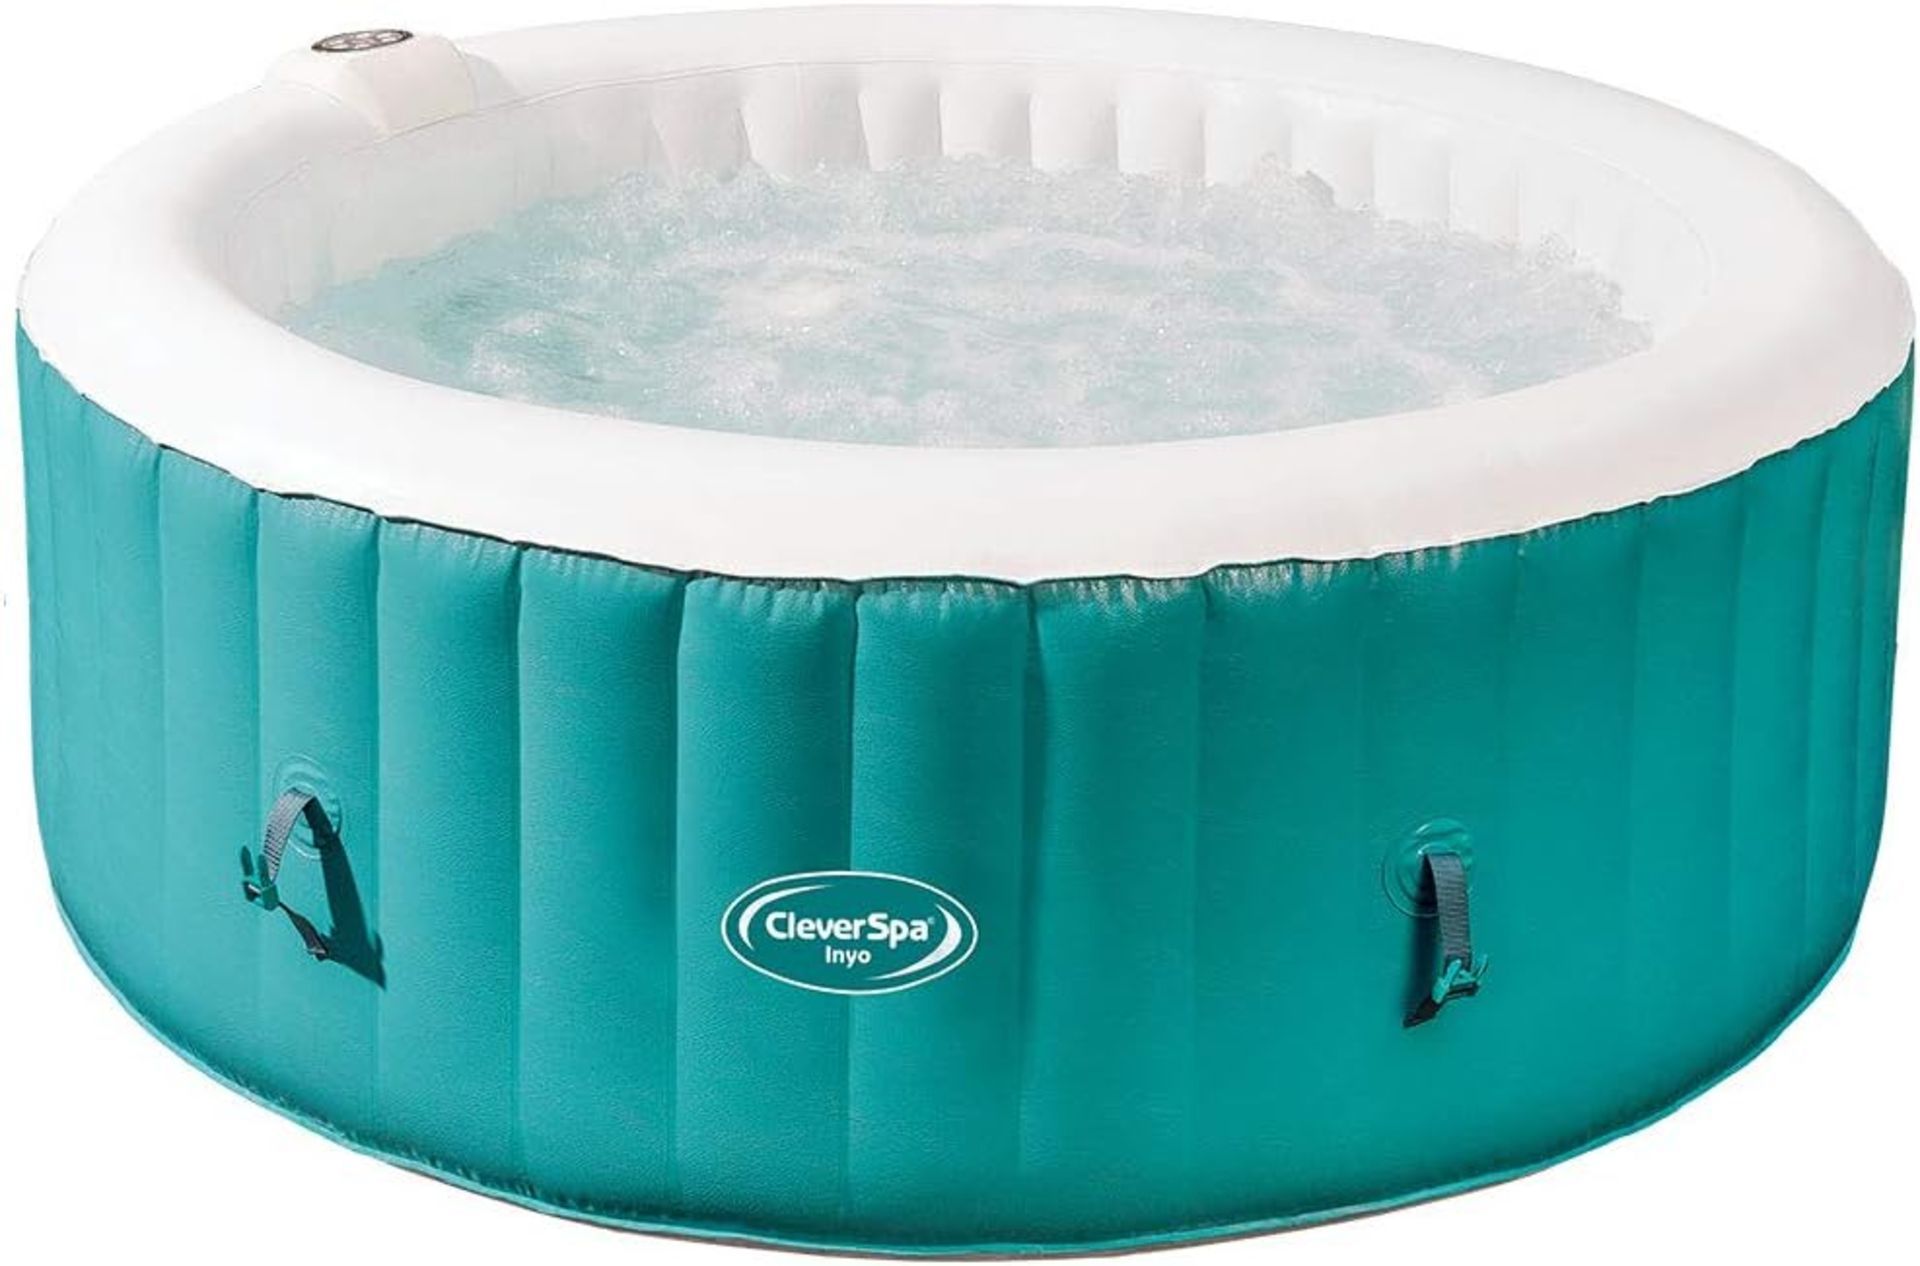 TRADE LOT 4 x New & Boxed CleverSpa Inyo 4 Person Hot Tub. RRP £499.99 each. There is no occasion or - Image 4 of 5